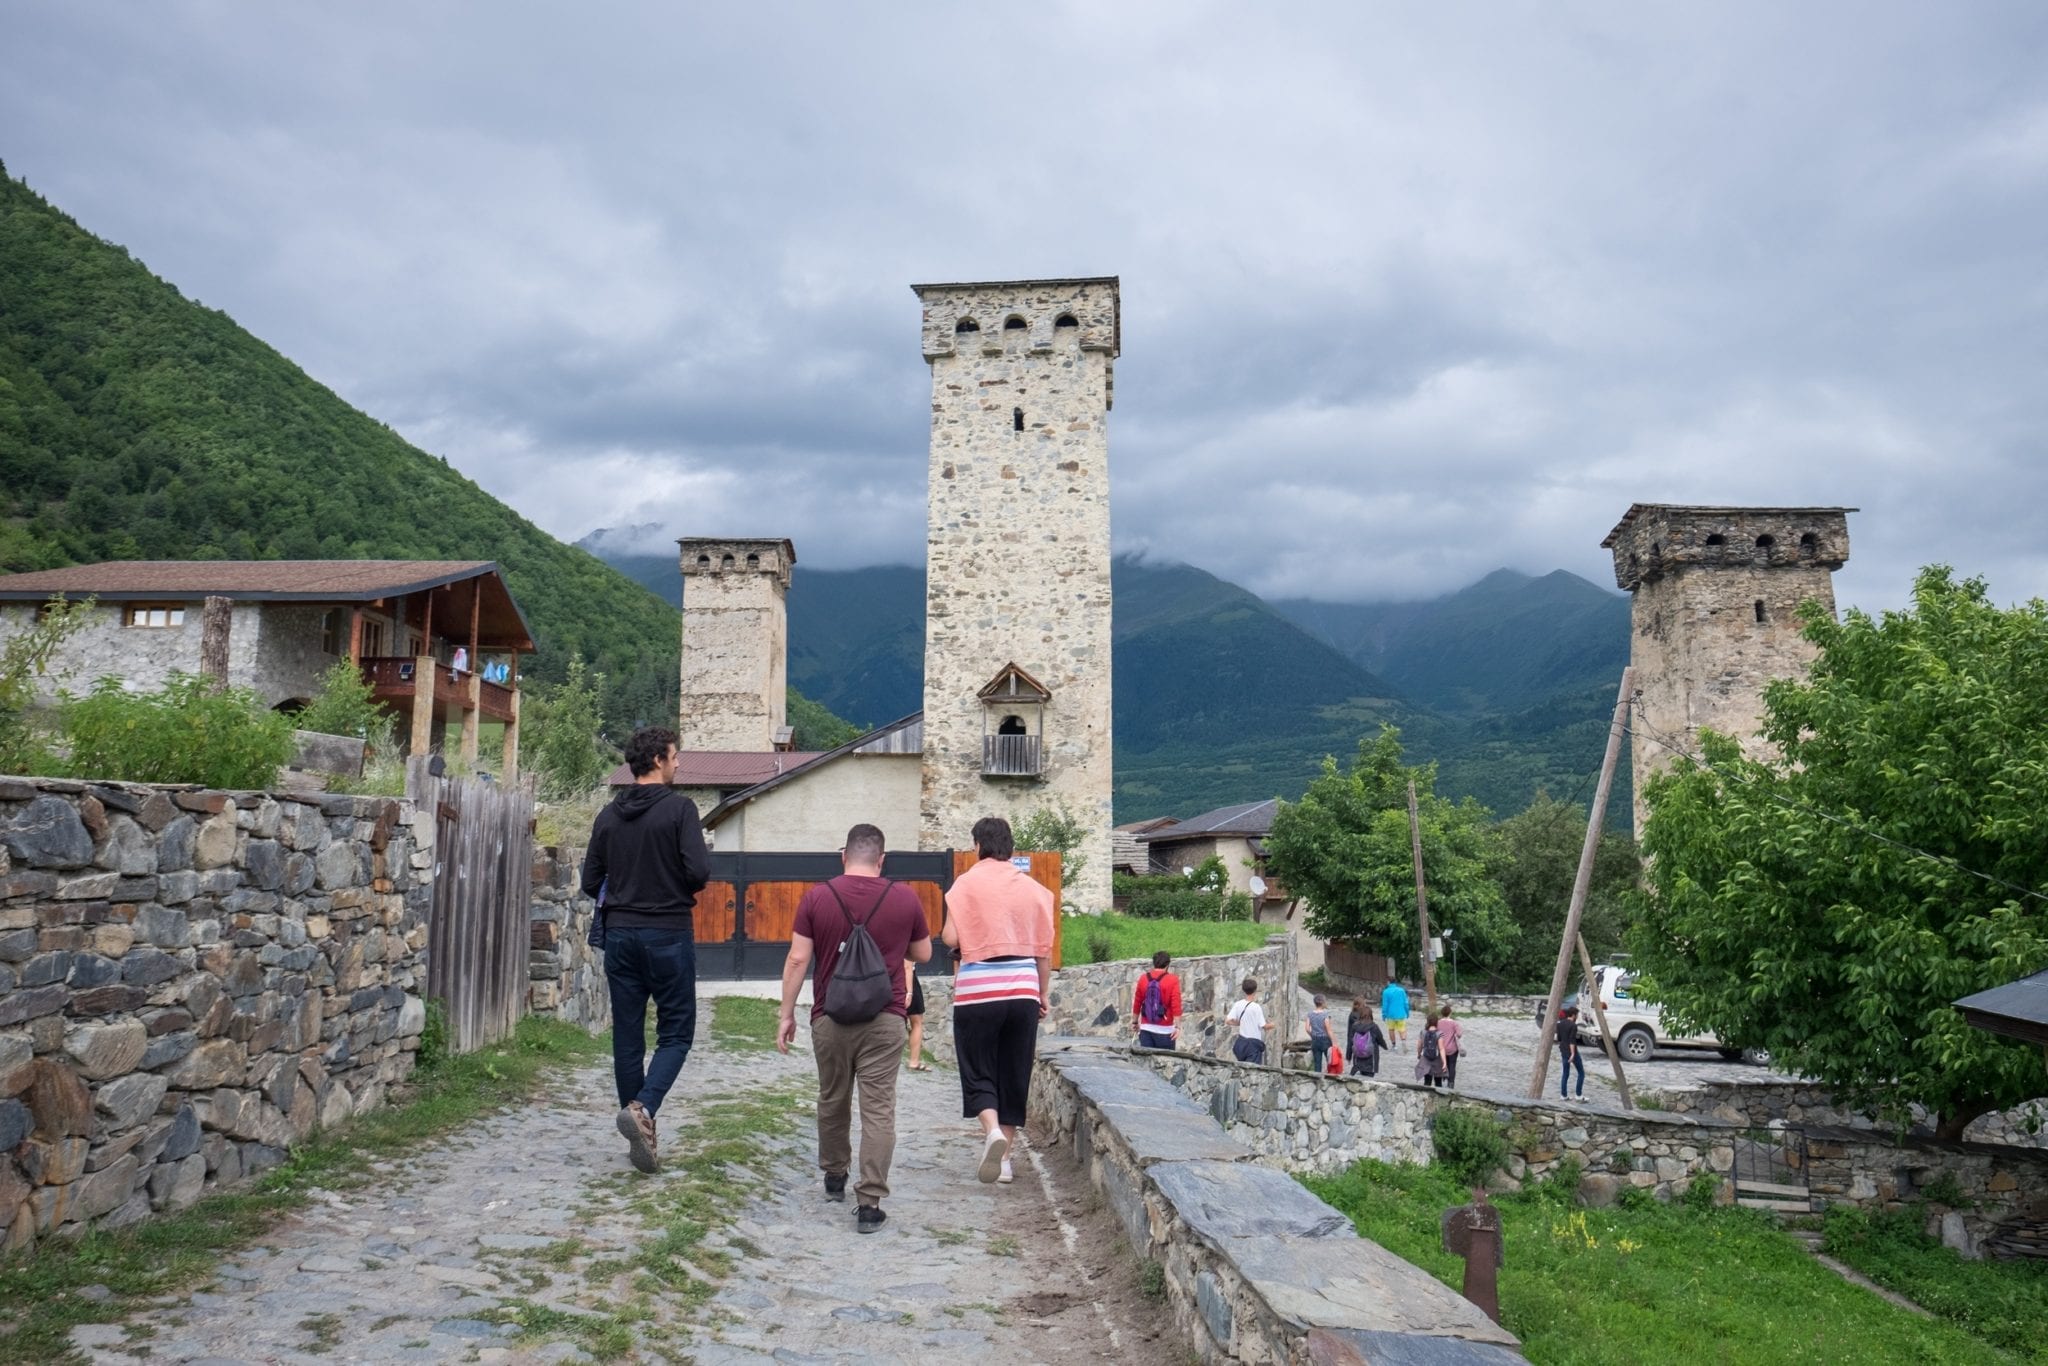 A group of bloggers walking toward one of the large stone towers, cloudy sky overhead.